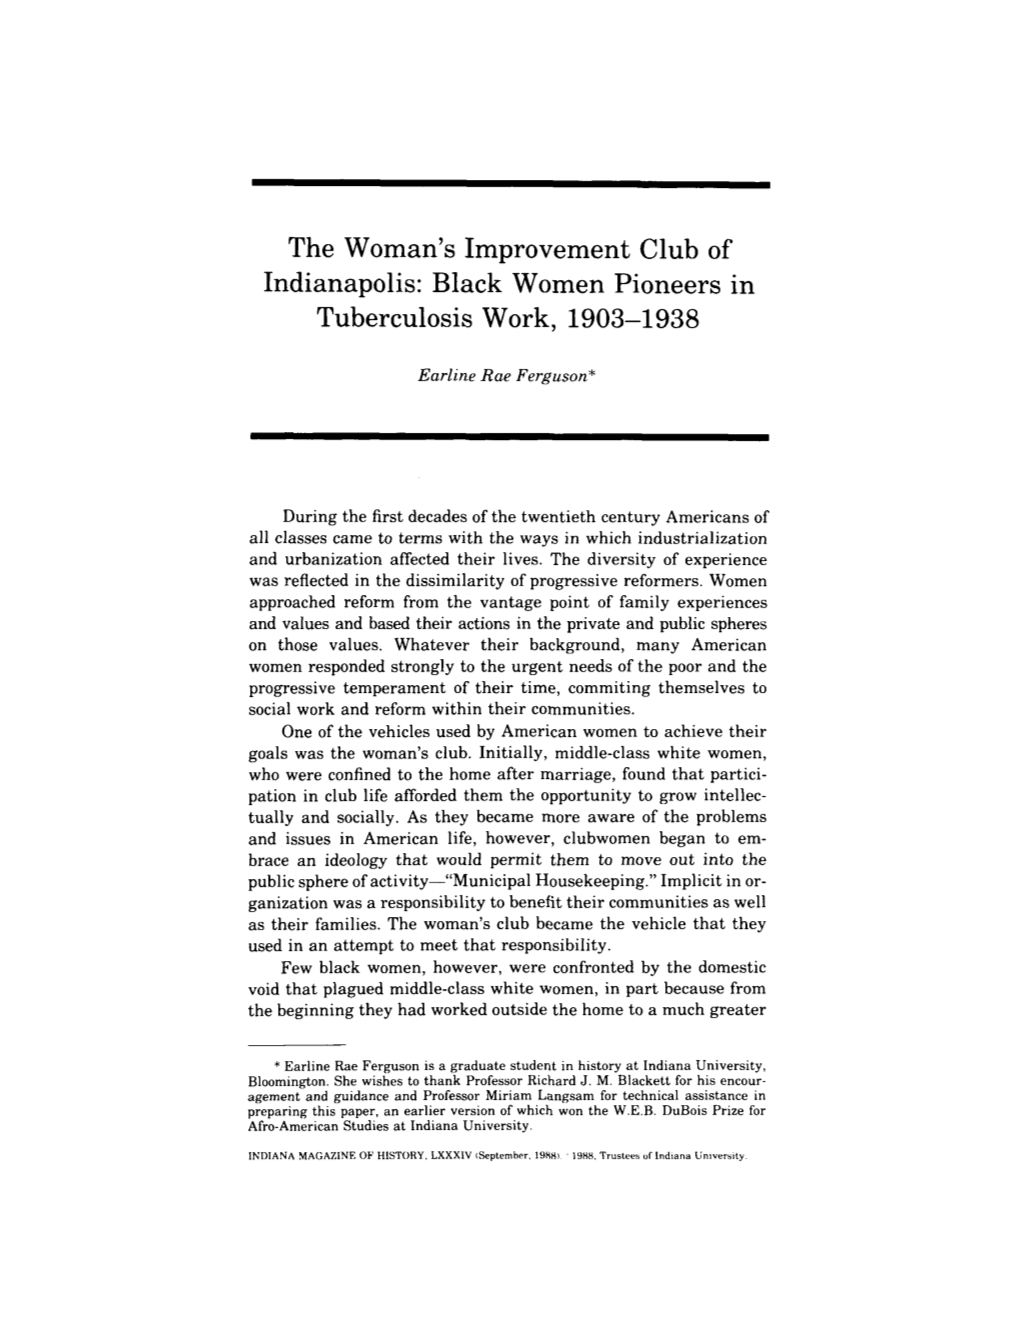 The Woman's Improvement Club of Indianapolis